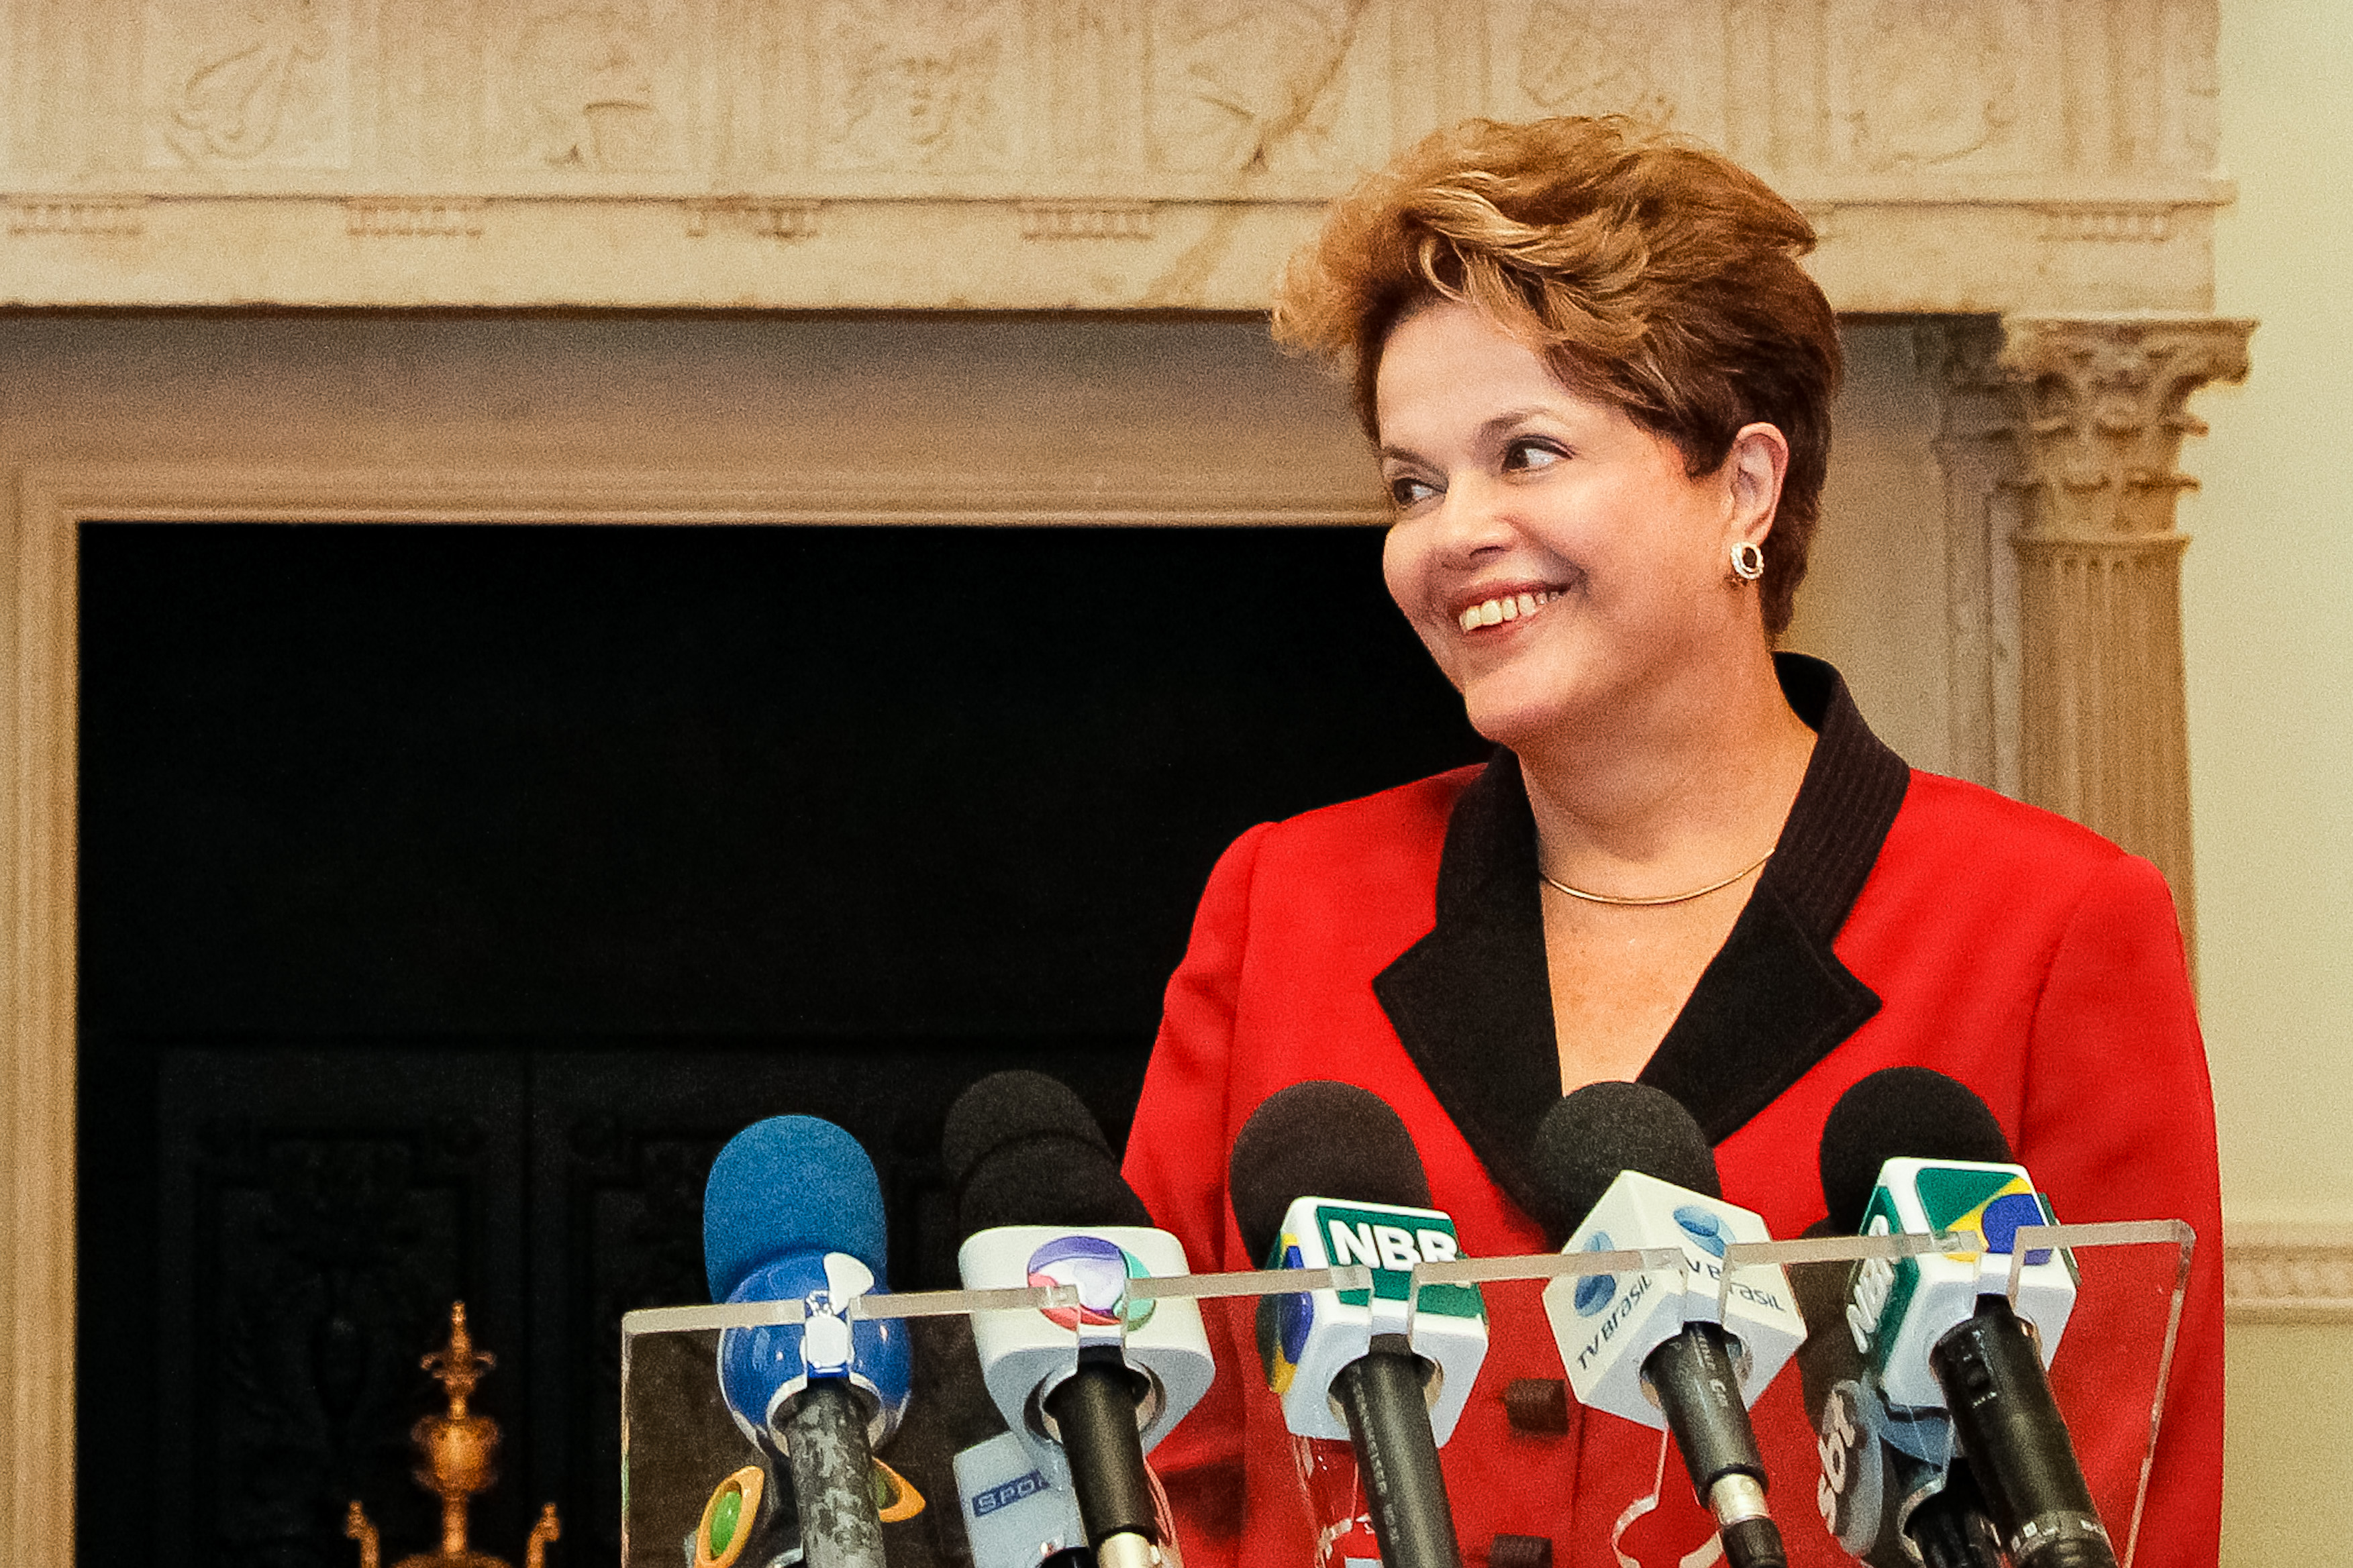 Brazilian President Dilma Rousseff addressed journalists in London ahead of the Olympics Games' Opening Ceremony, photo by Roberto Stuckert Filho/PR